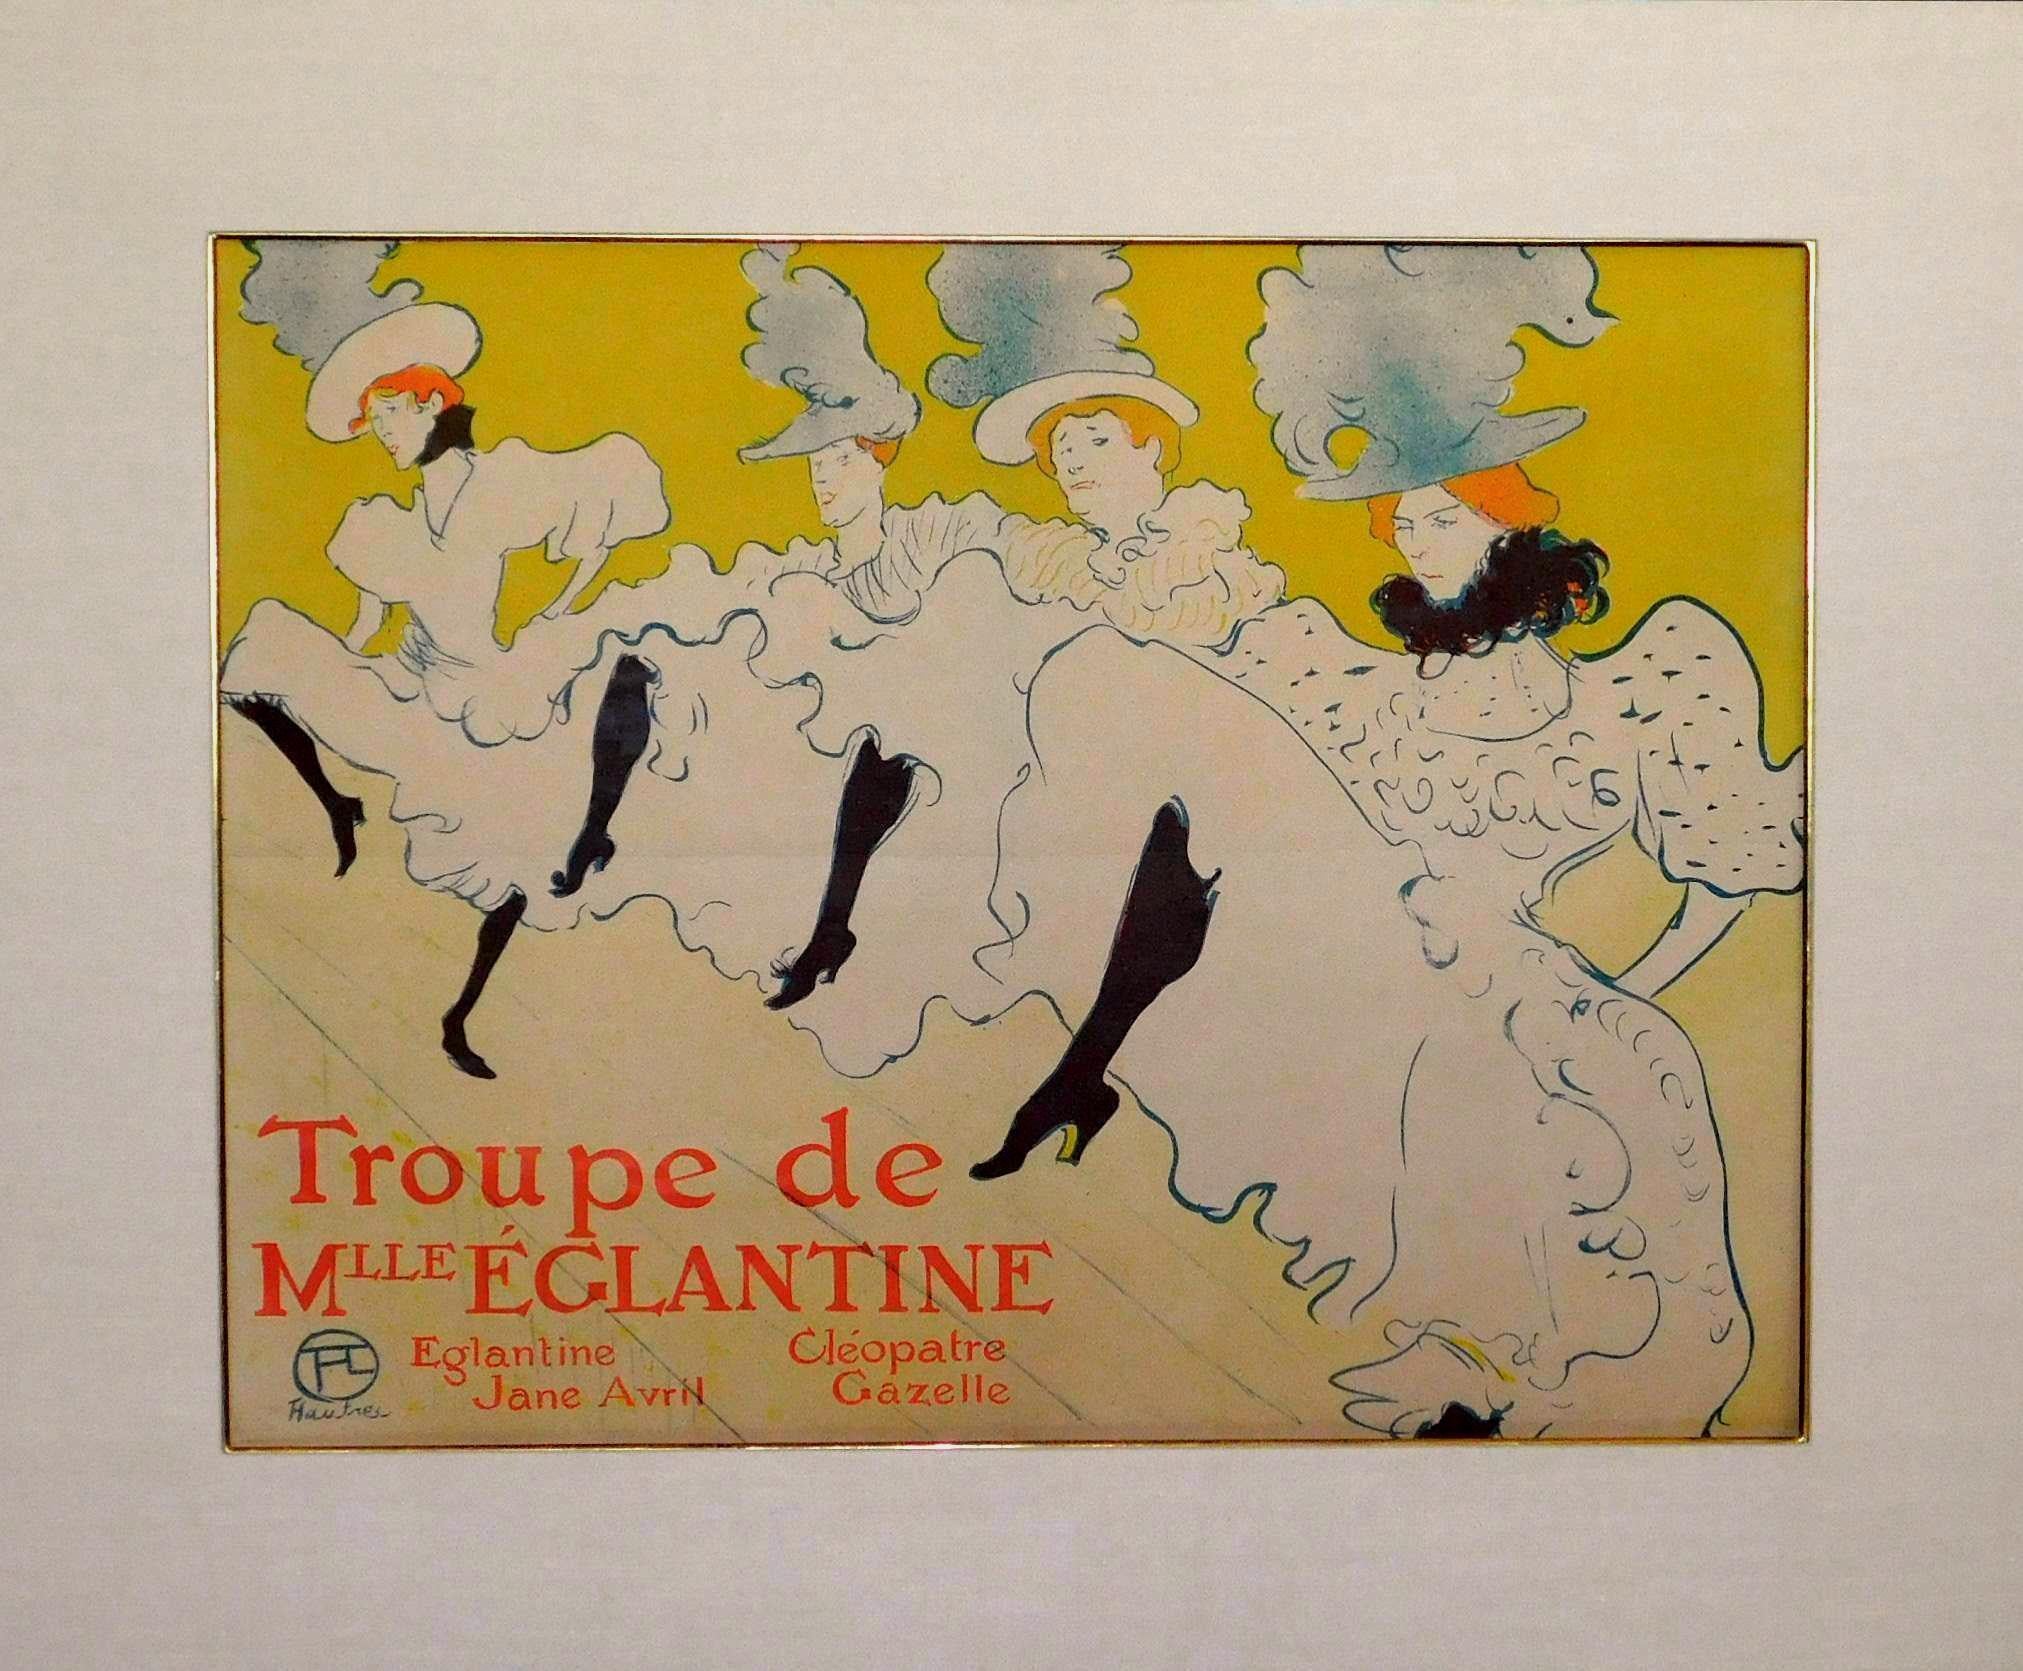 Henri de Toulouse-Lautrec (French 1864–1901) lithograph (poster) printed in three colors on machine wove paper. Created 1895. Printed in 1896.
Sheet size: 24